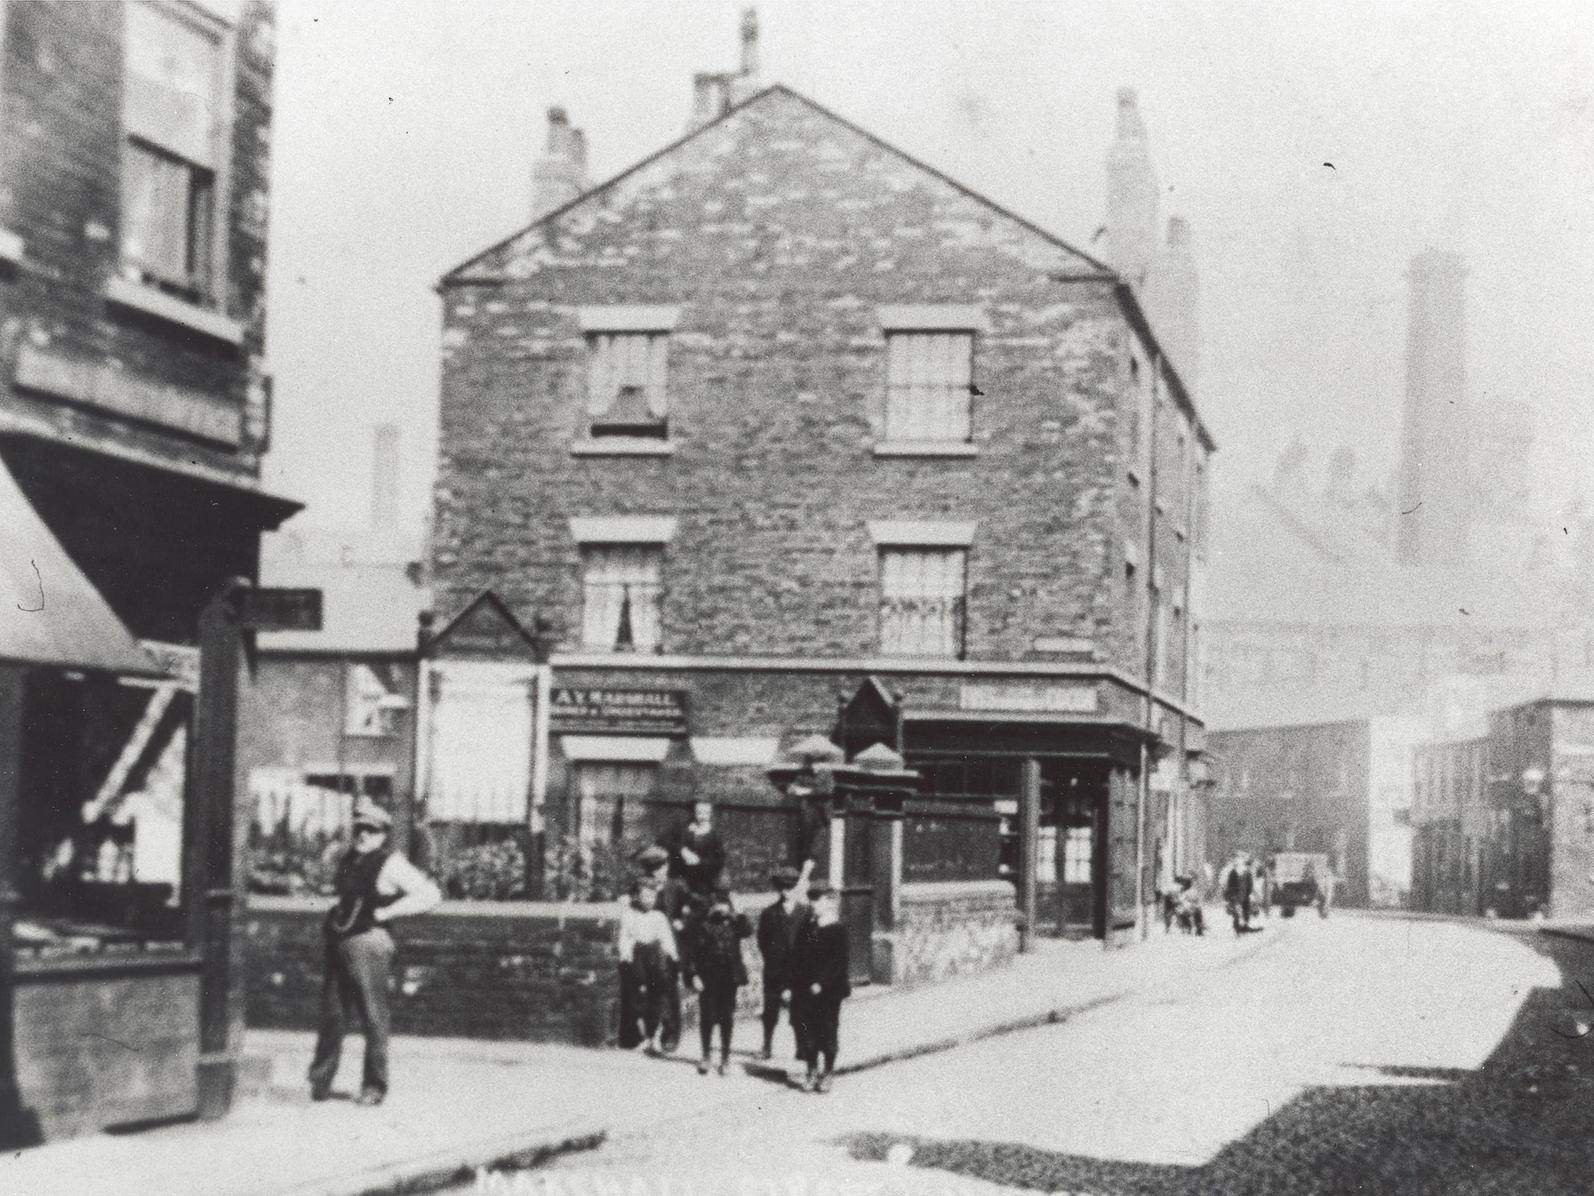 Marshall Street in Holbeck.